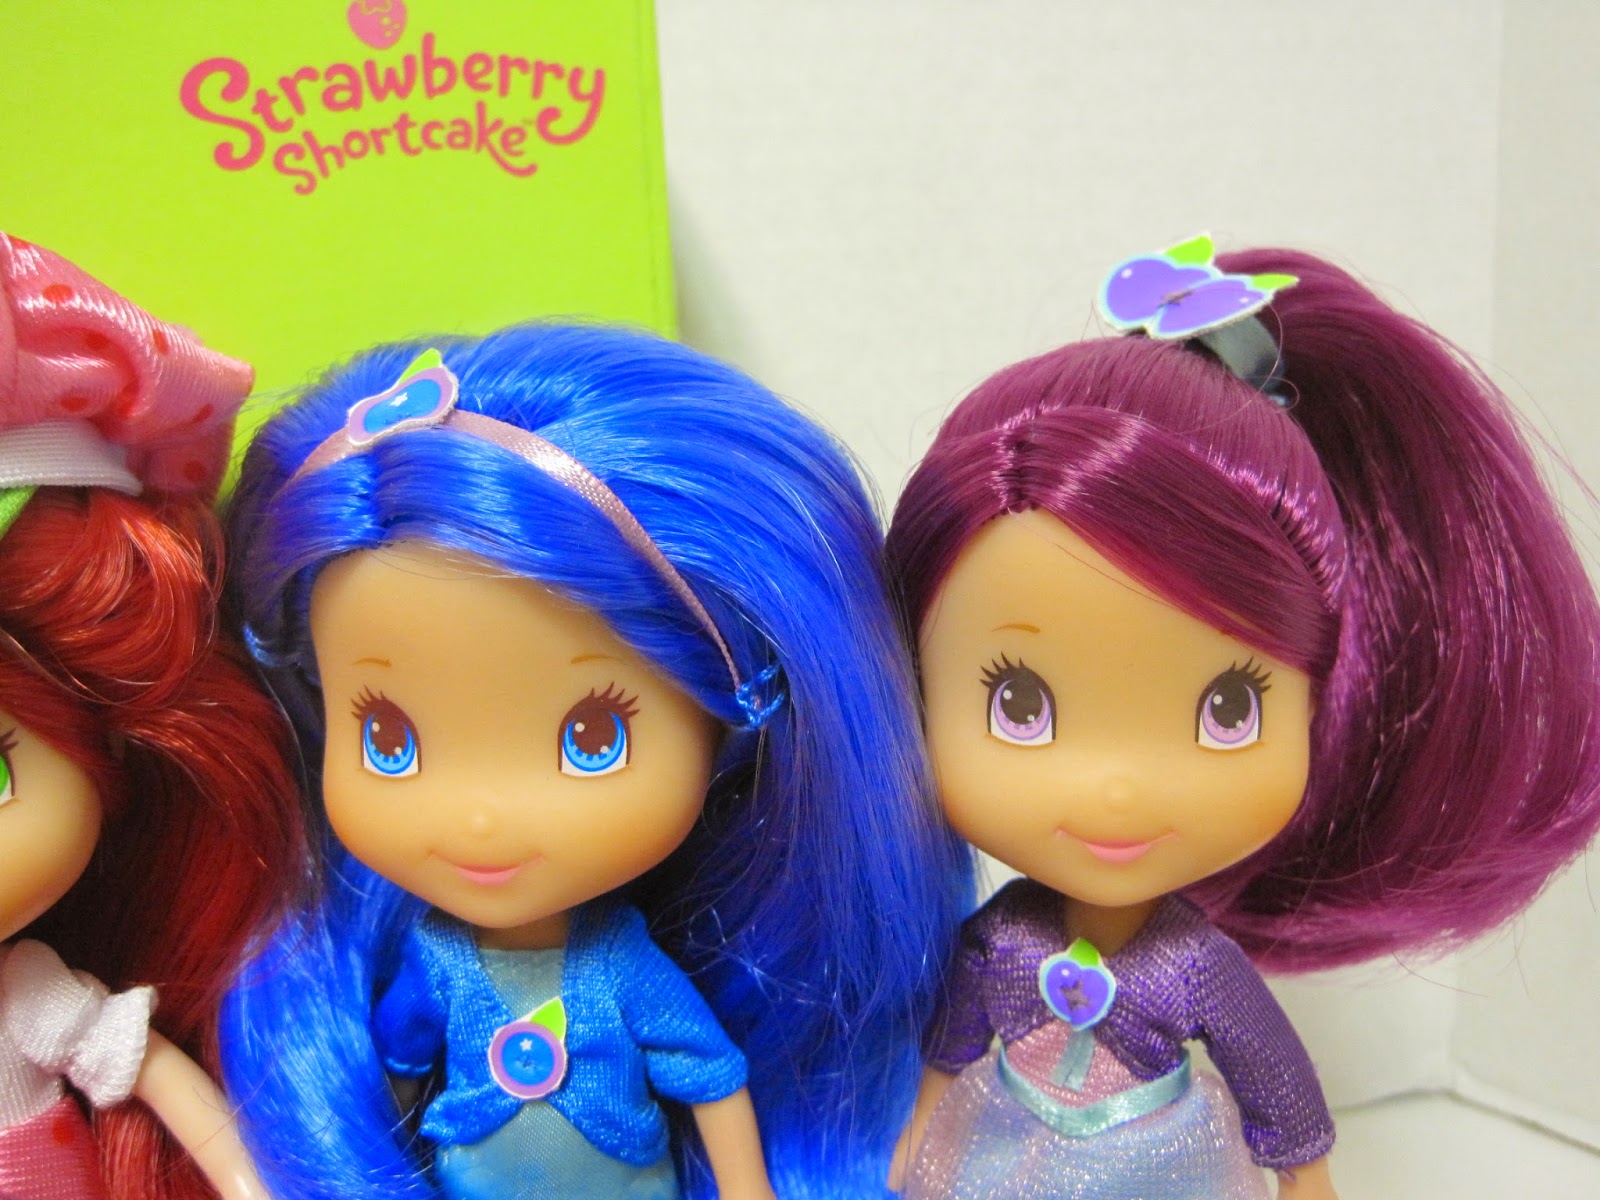 Strawberry Shortcake Blueberry Muffin Doll with Blue Hair and Blueberry Scented Hair - wide 11